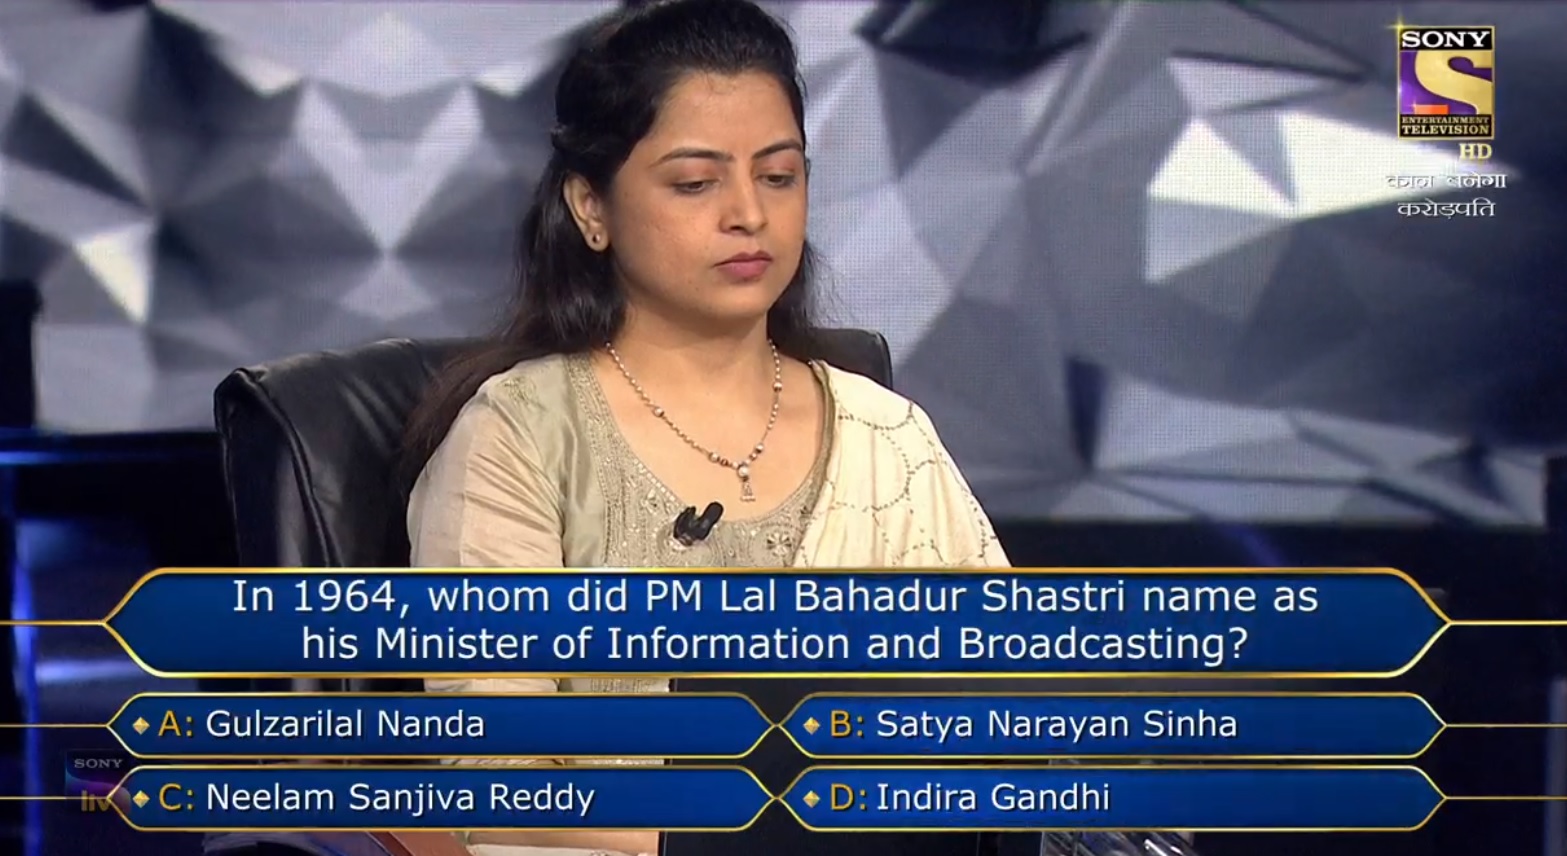 Ques : In 1964, whom did PM Lal Bahadur Shastri name as his Minister of Information and Broadcasting?